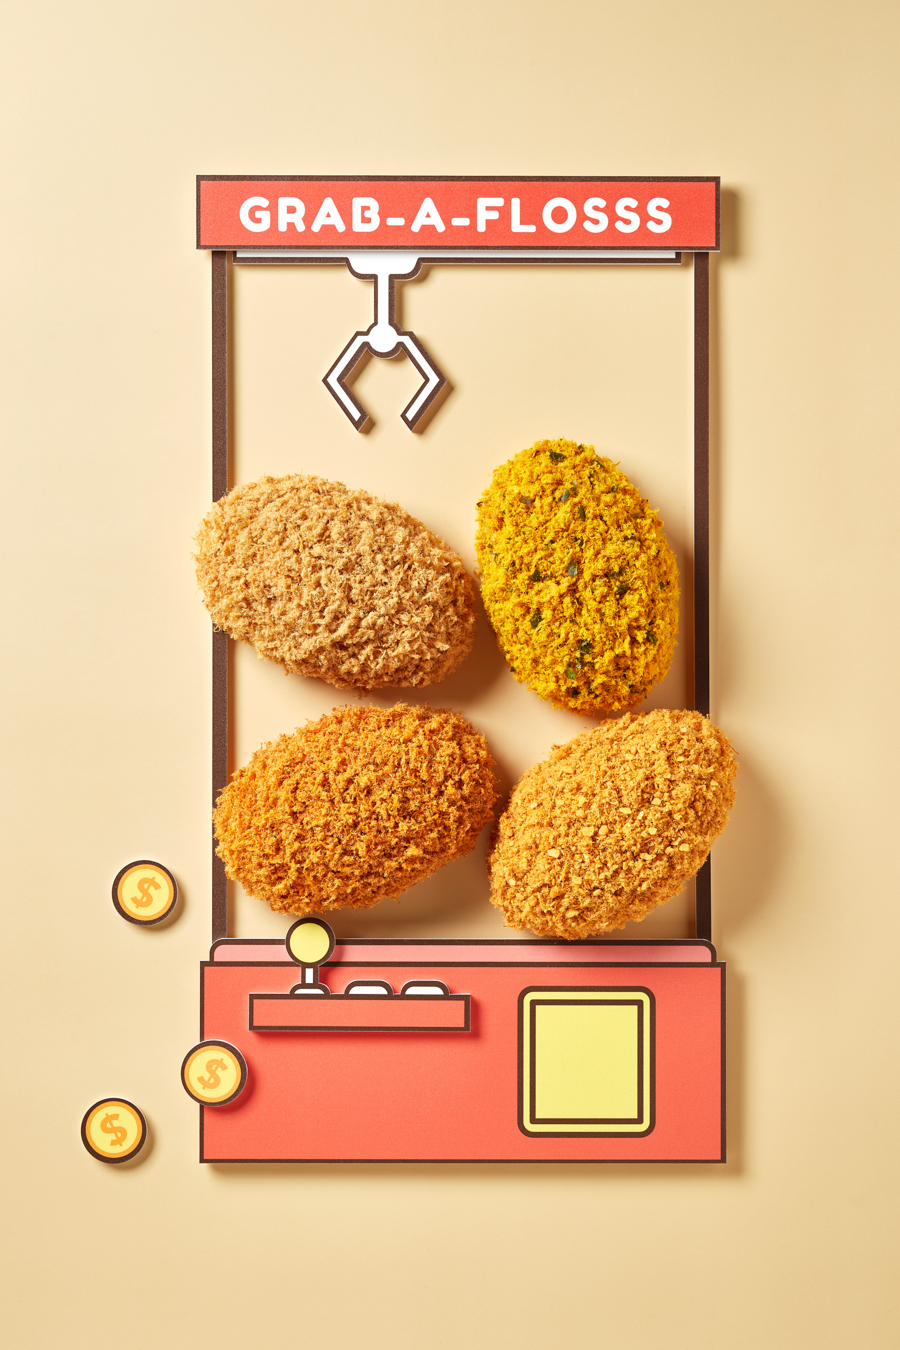 A promotional poster for the BreadTalk Flosss buns